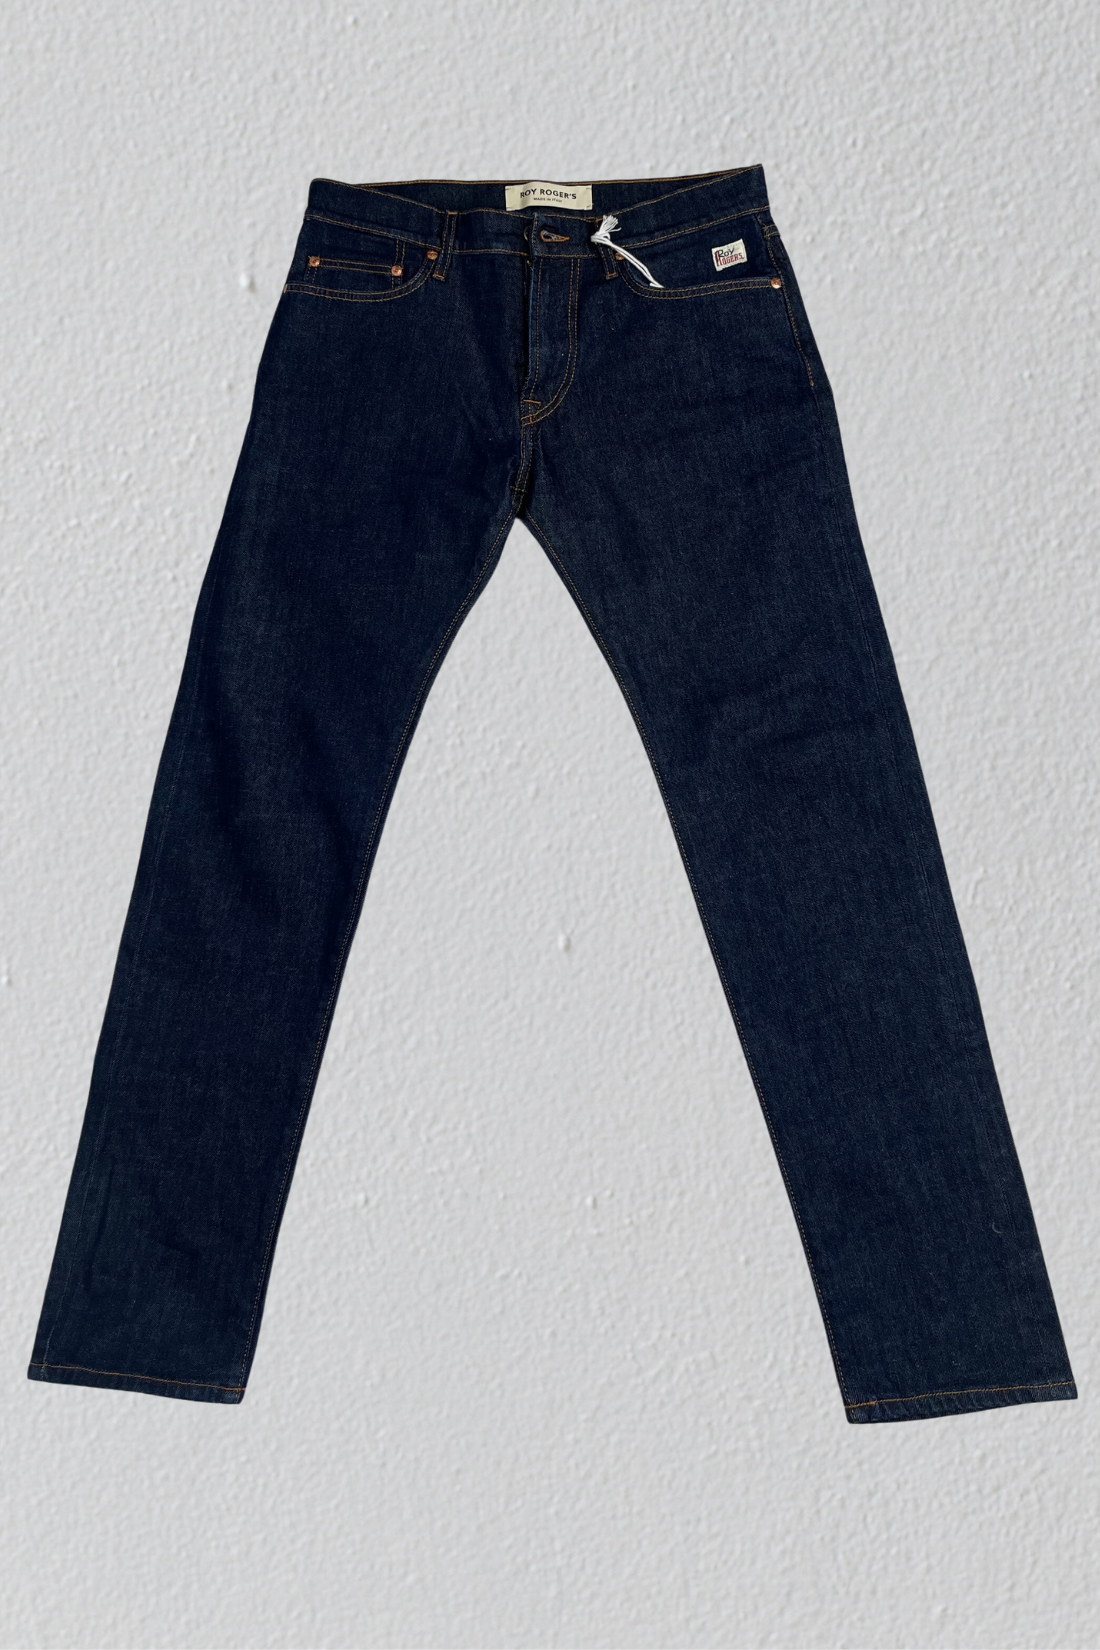 Roy Roger's Jeans Cult Zip Rinse